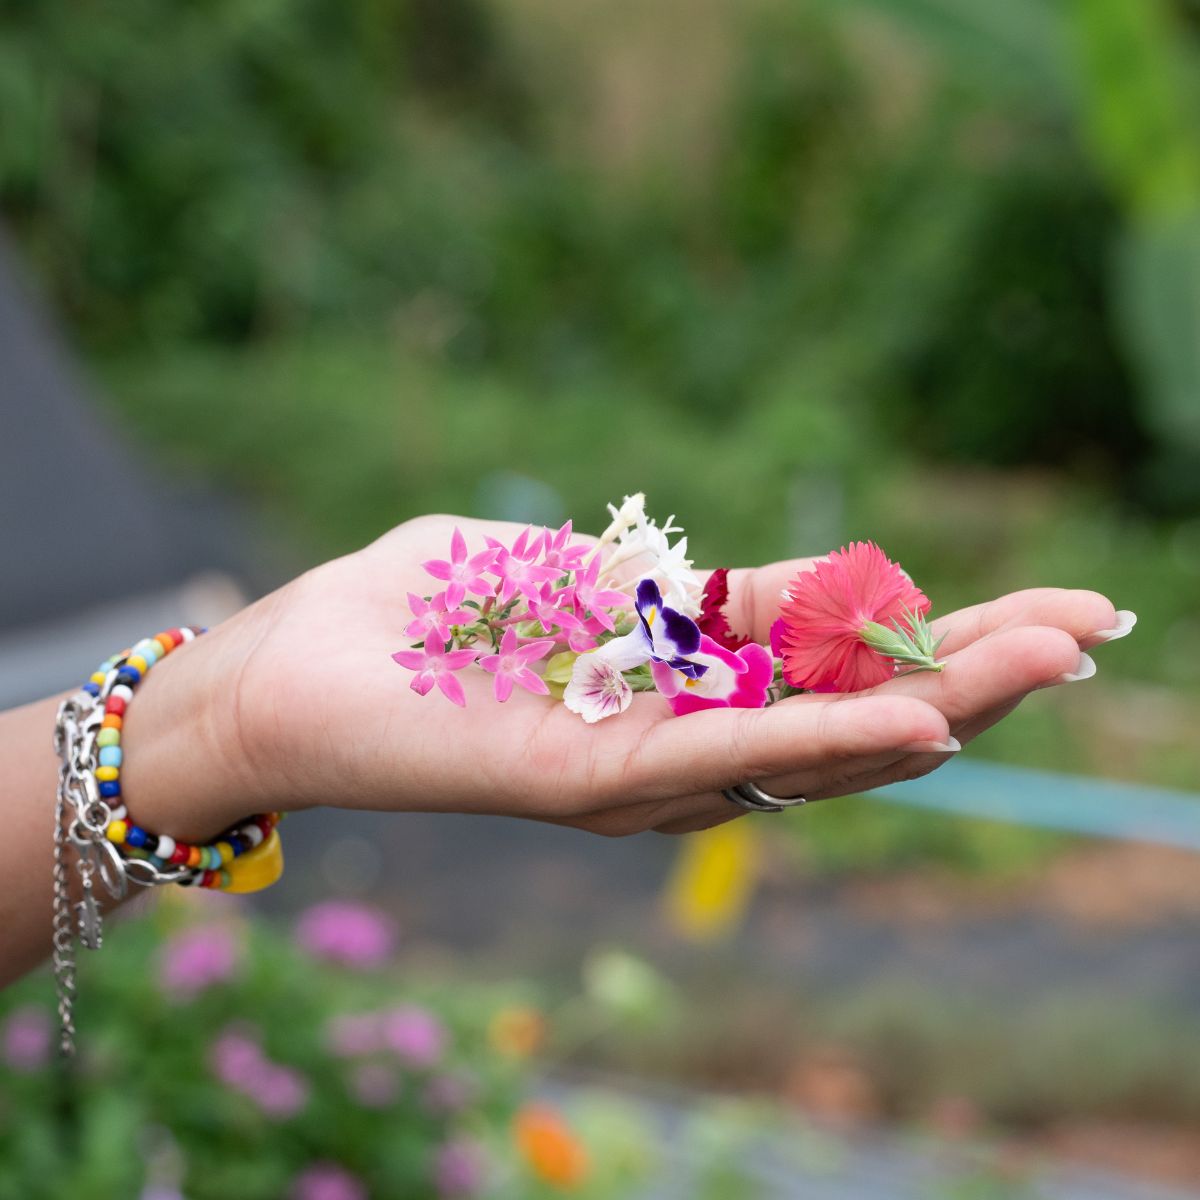 A hand holding edible flowers.